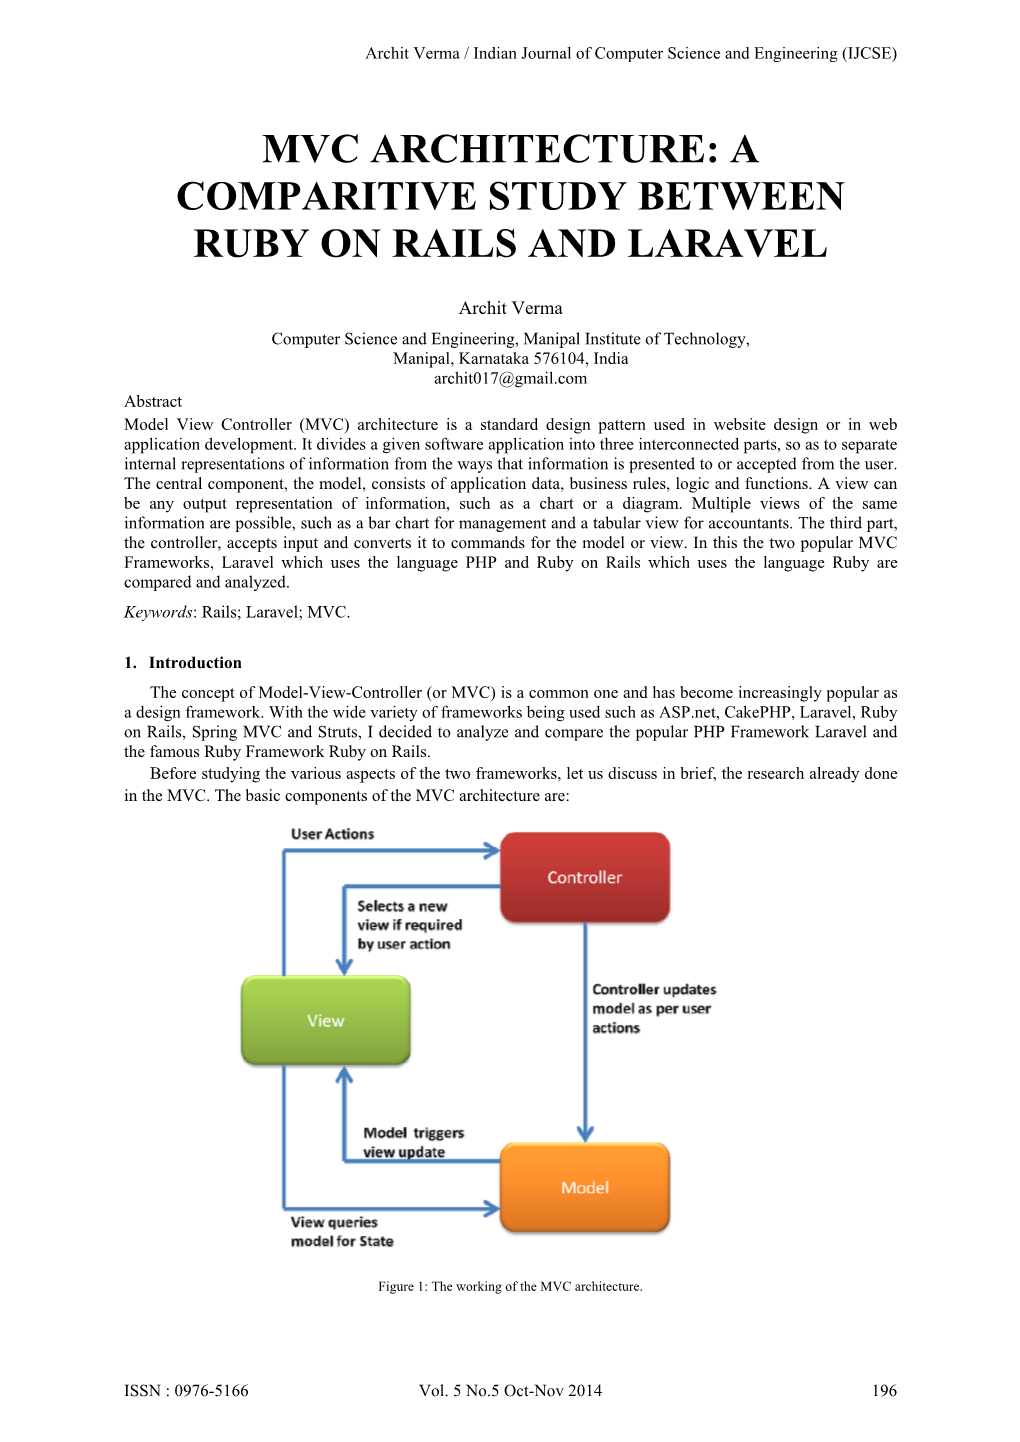 Mvc Architecture: a Comparitive Study Between Ruby on Rails and Laravel